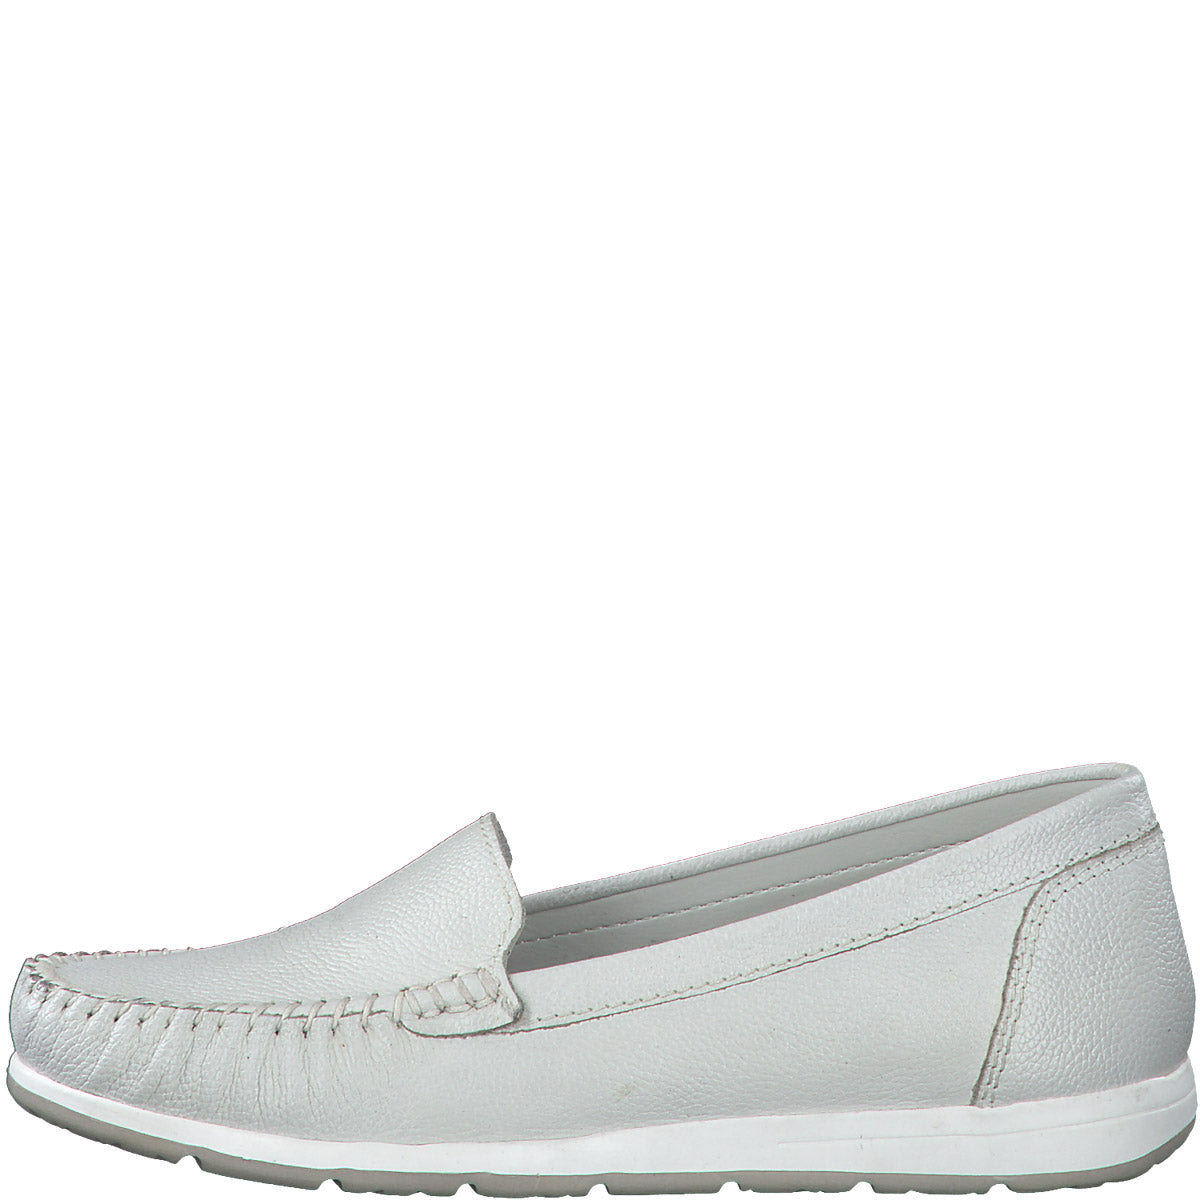 Perfect Pick Almond-Toe Loafers in White